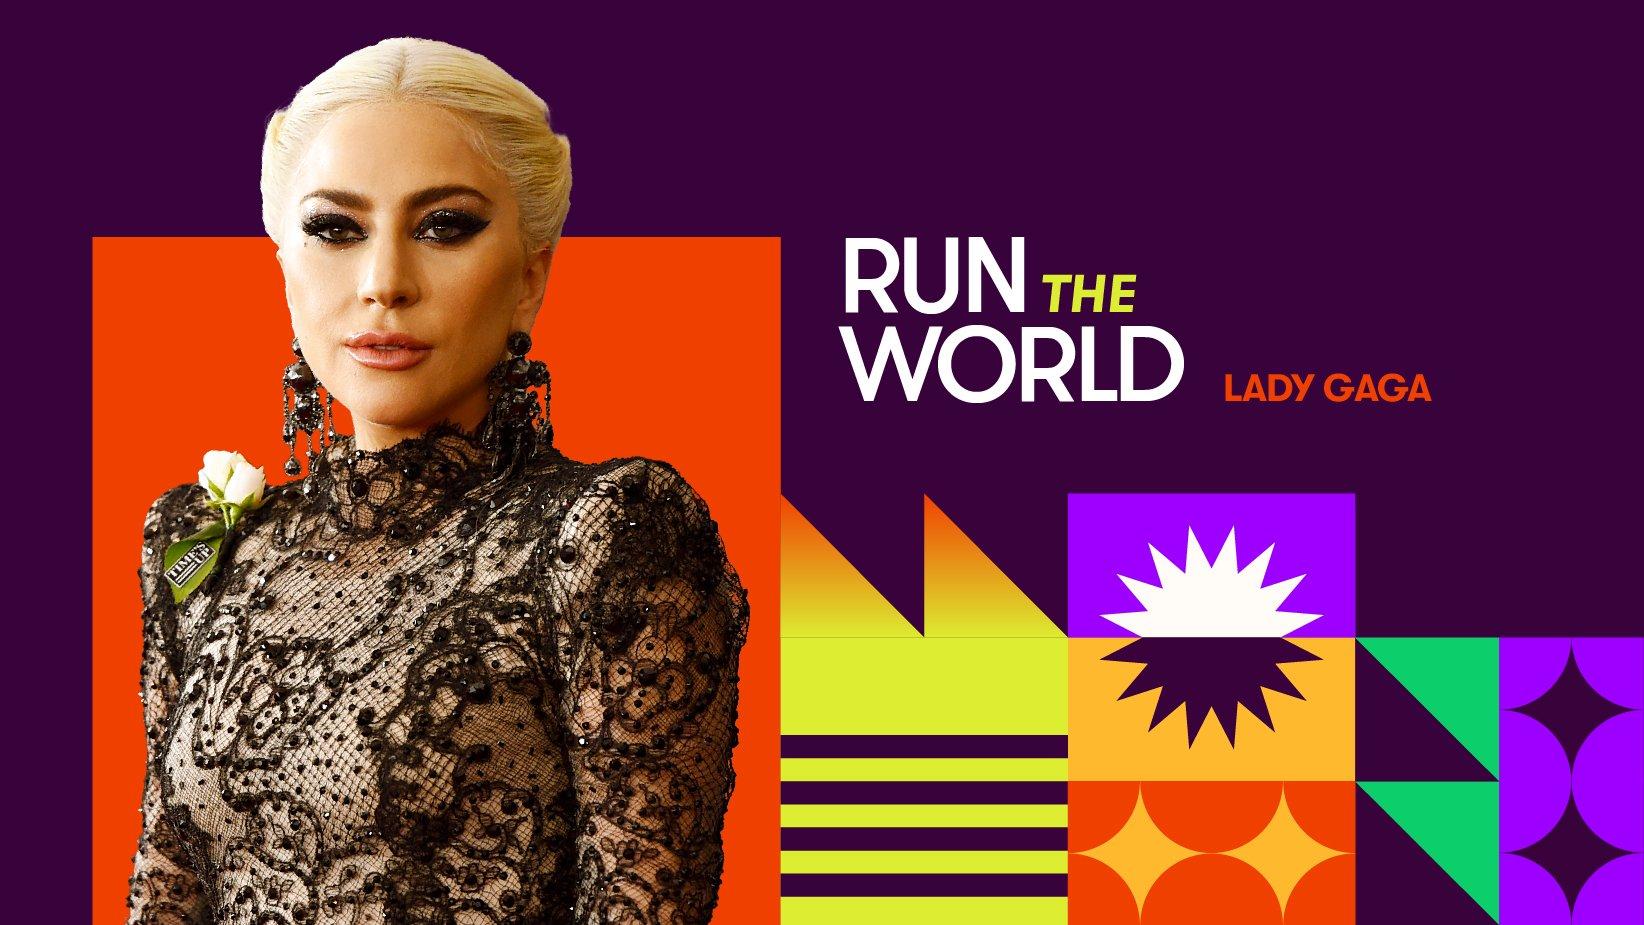 Run The World: How Lady Gaga Changed The Music Industry With Dance